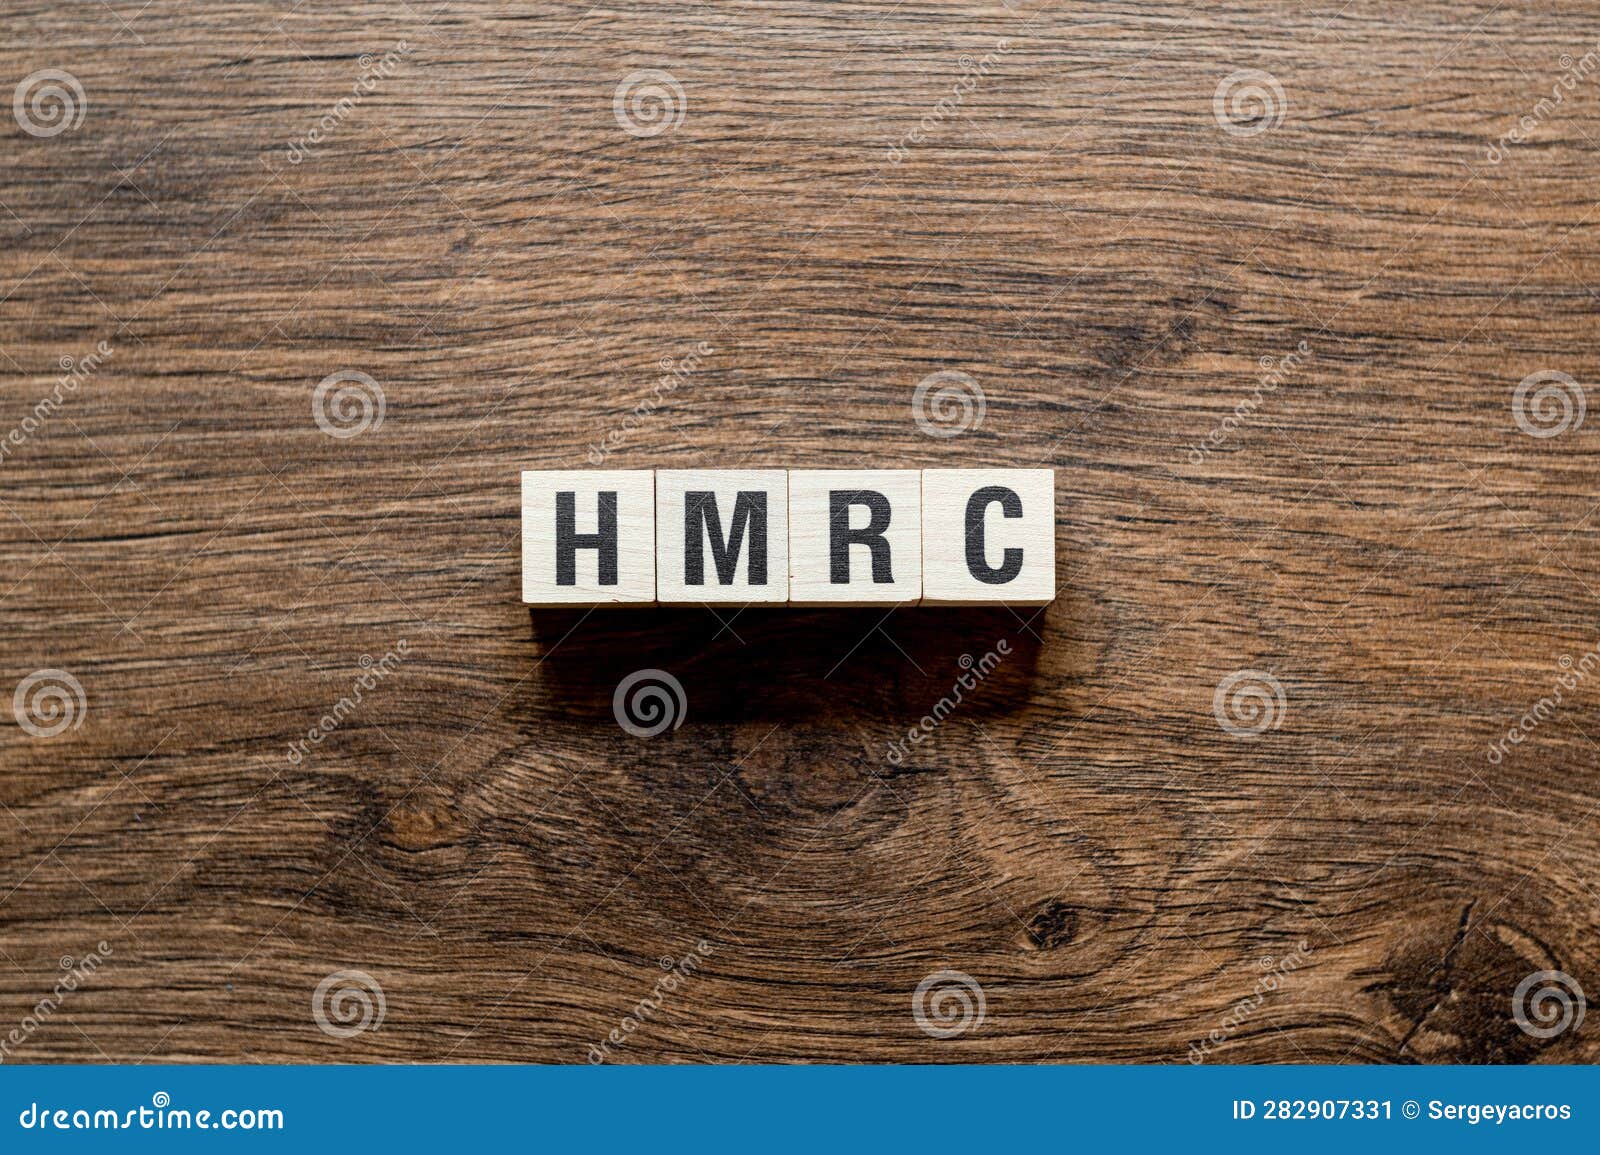 hmrc - majestys revenue and customs,word concept on building blocks, text